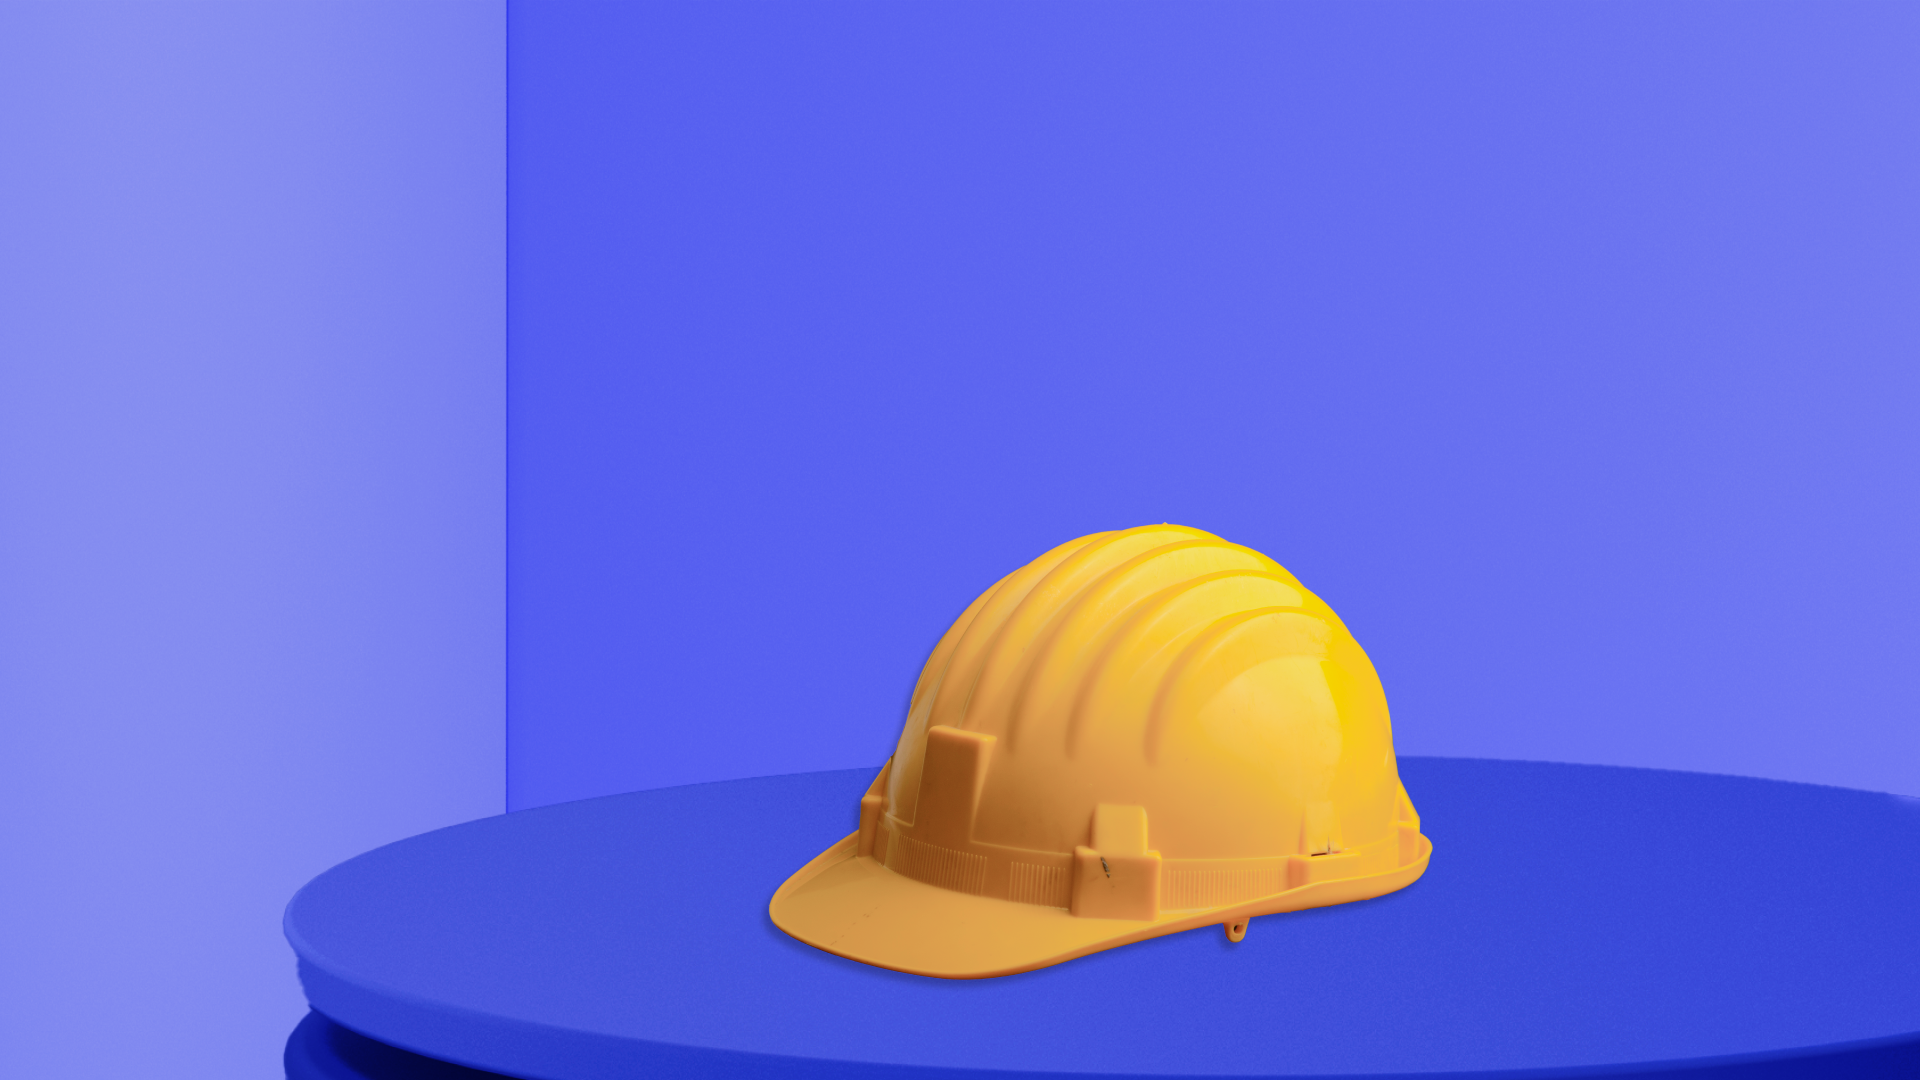 An image of a yellow hard hard on a blue background